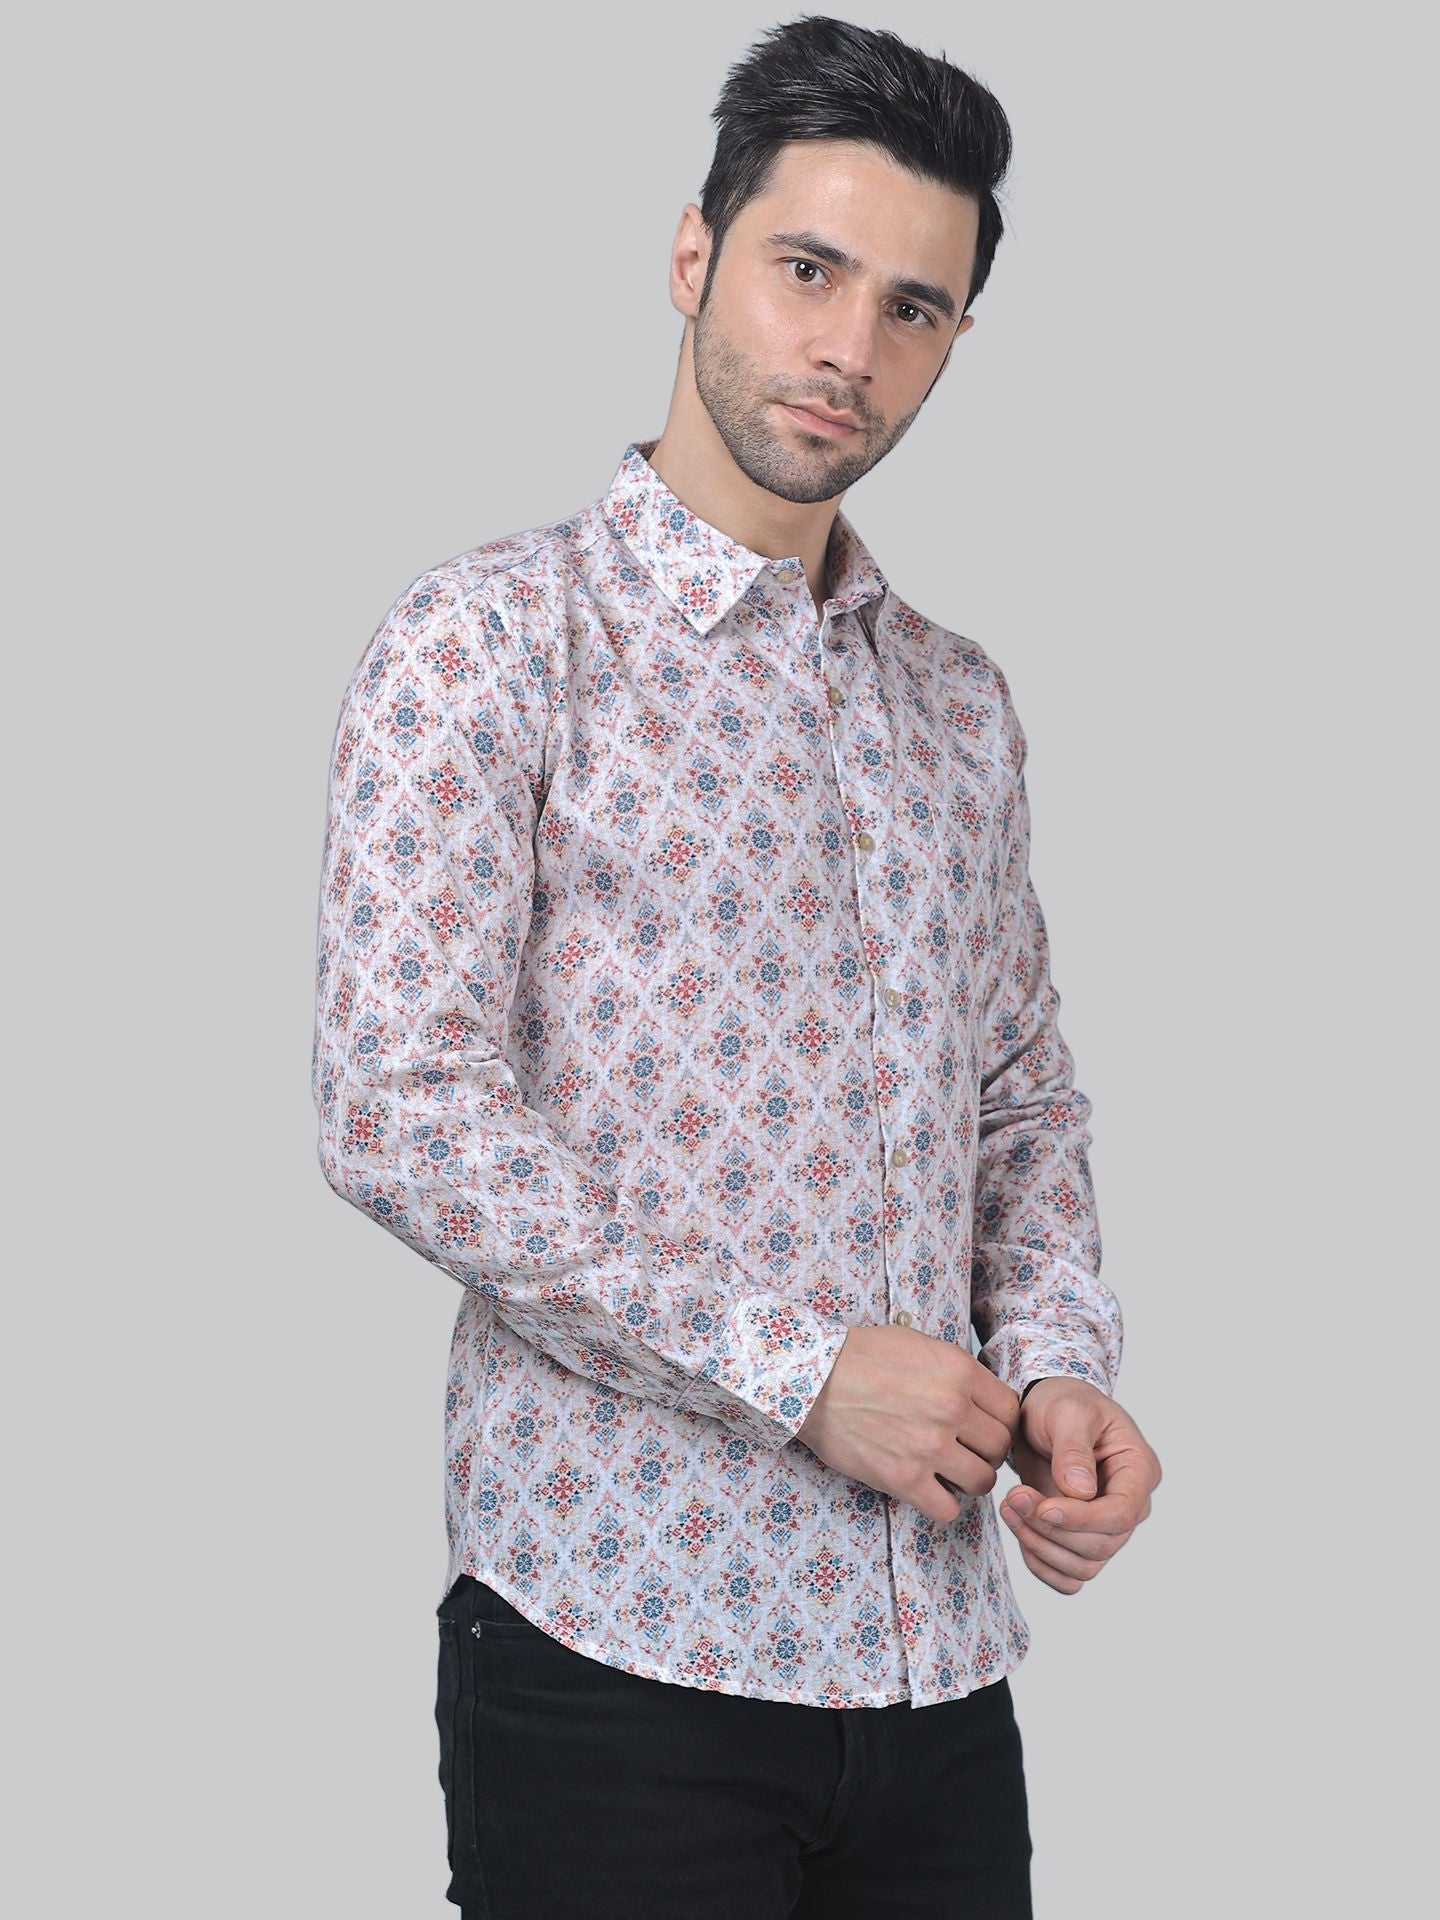 TryBuy Exclusive Men's Printed Full Sleeve Casual Linen Shirt - TryBuy® USA🇺🇸